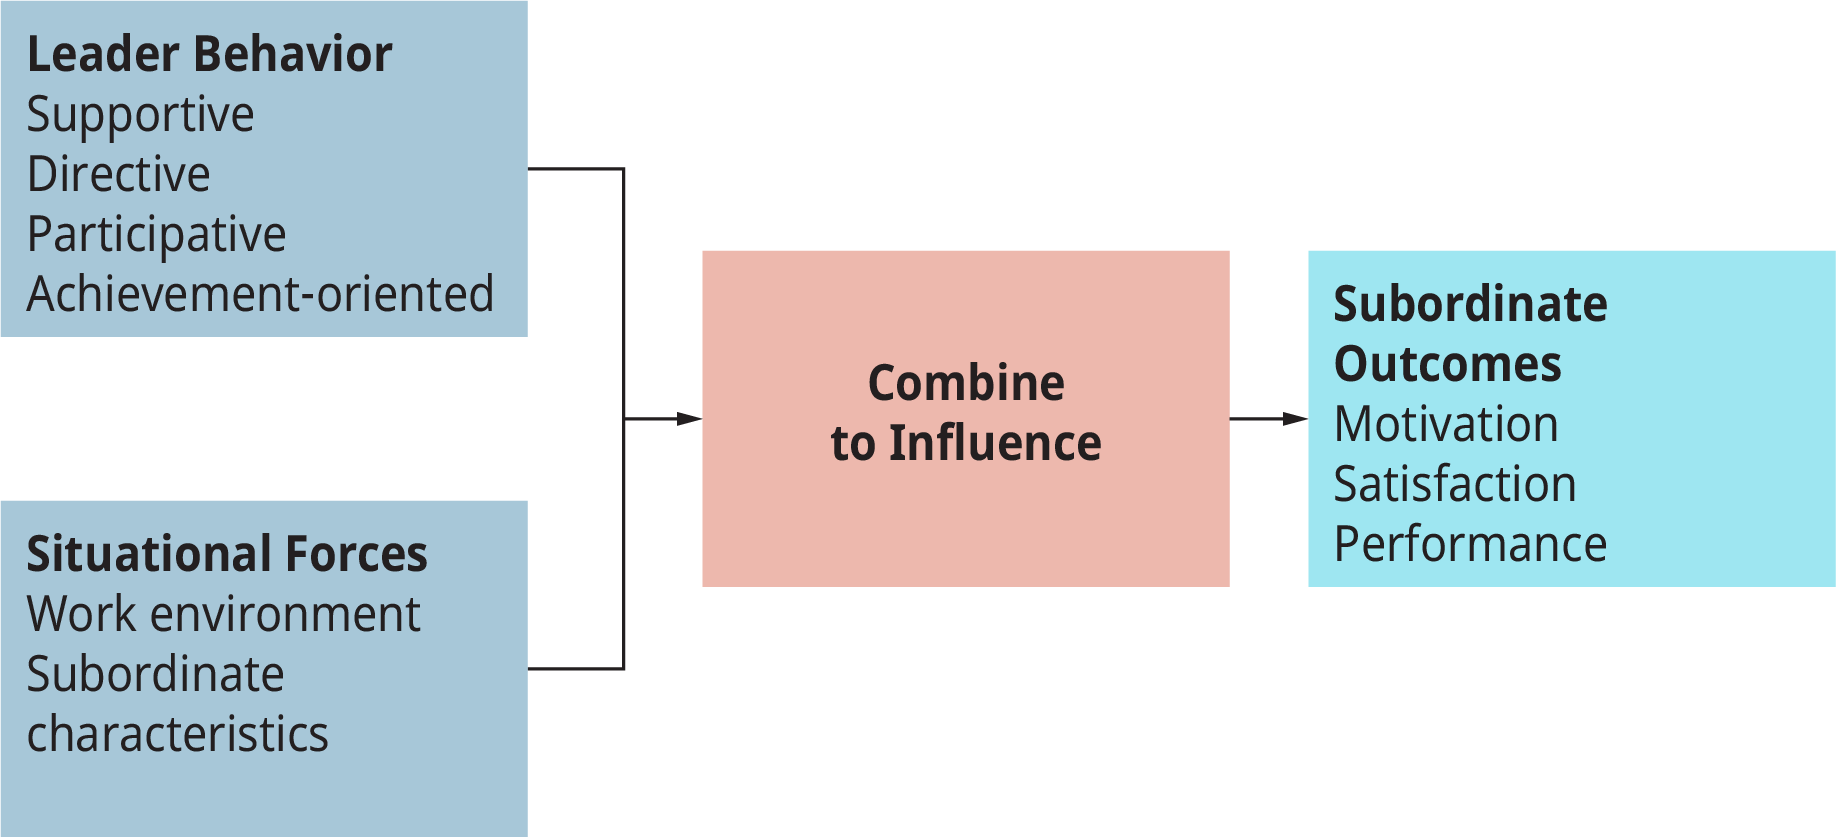 A diagram illustrates the path-goal leadership model based on leadership behavior and situational forces